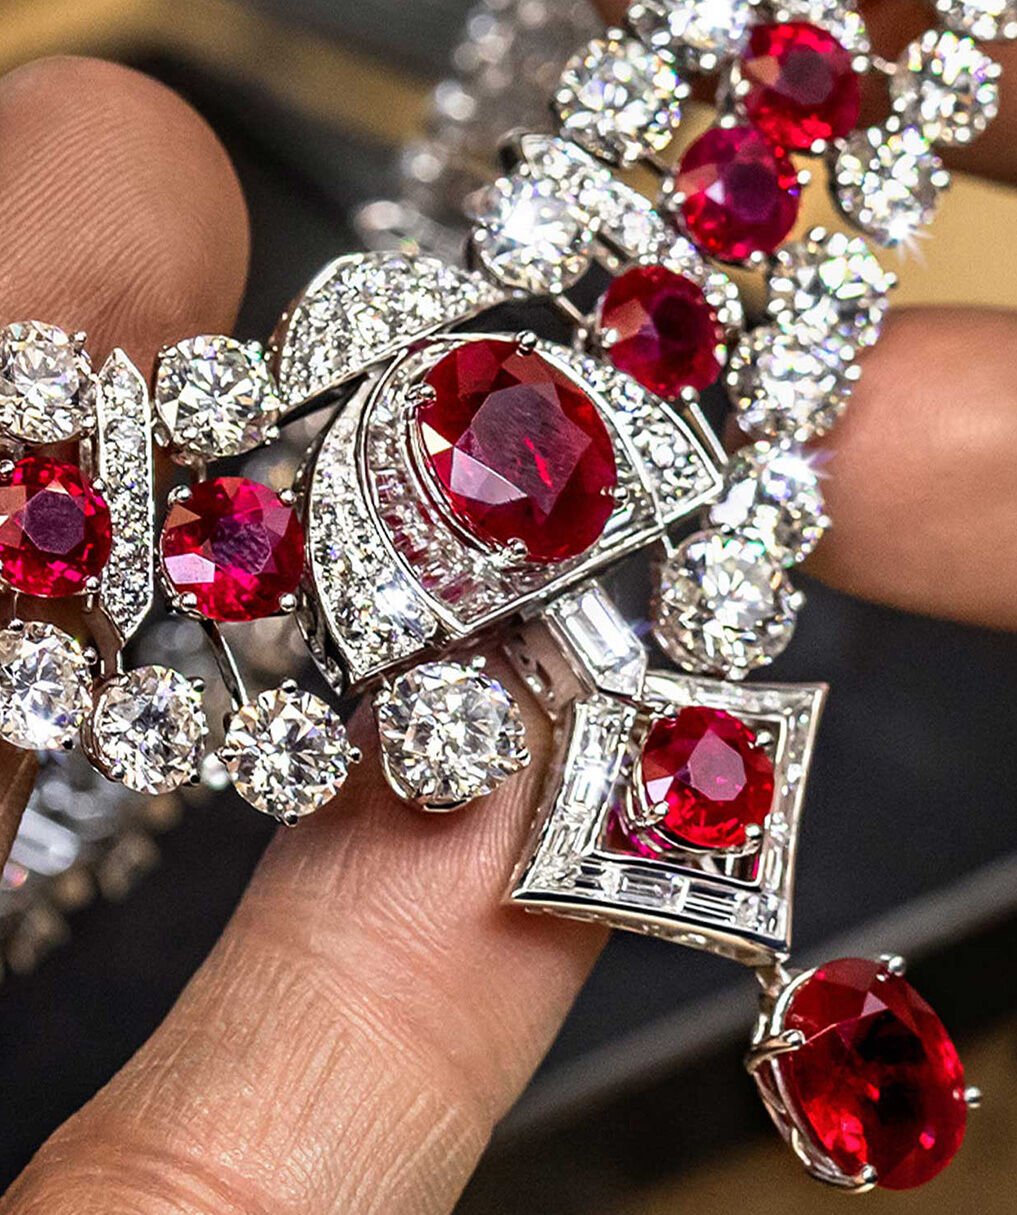 Craftsman holding Graff ruby and white diamond high jewellery necklace in Graff workshop